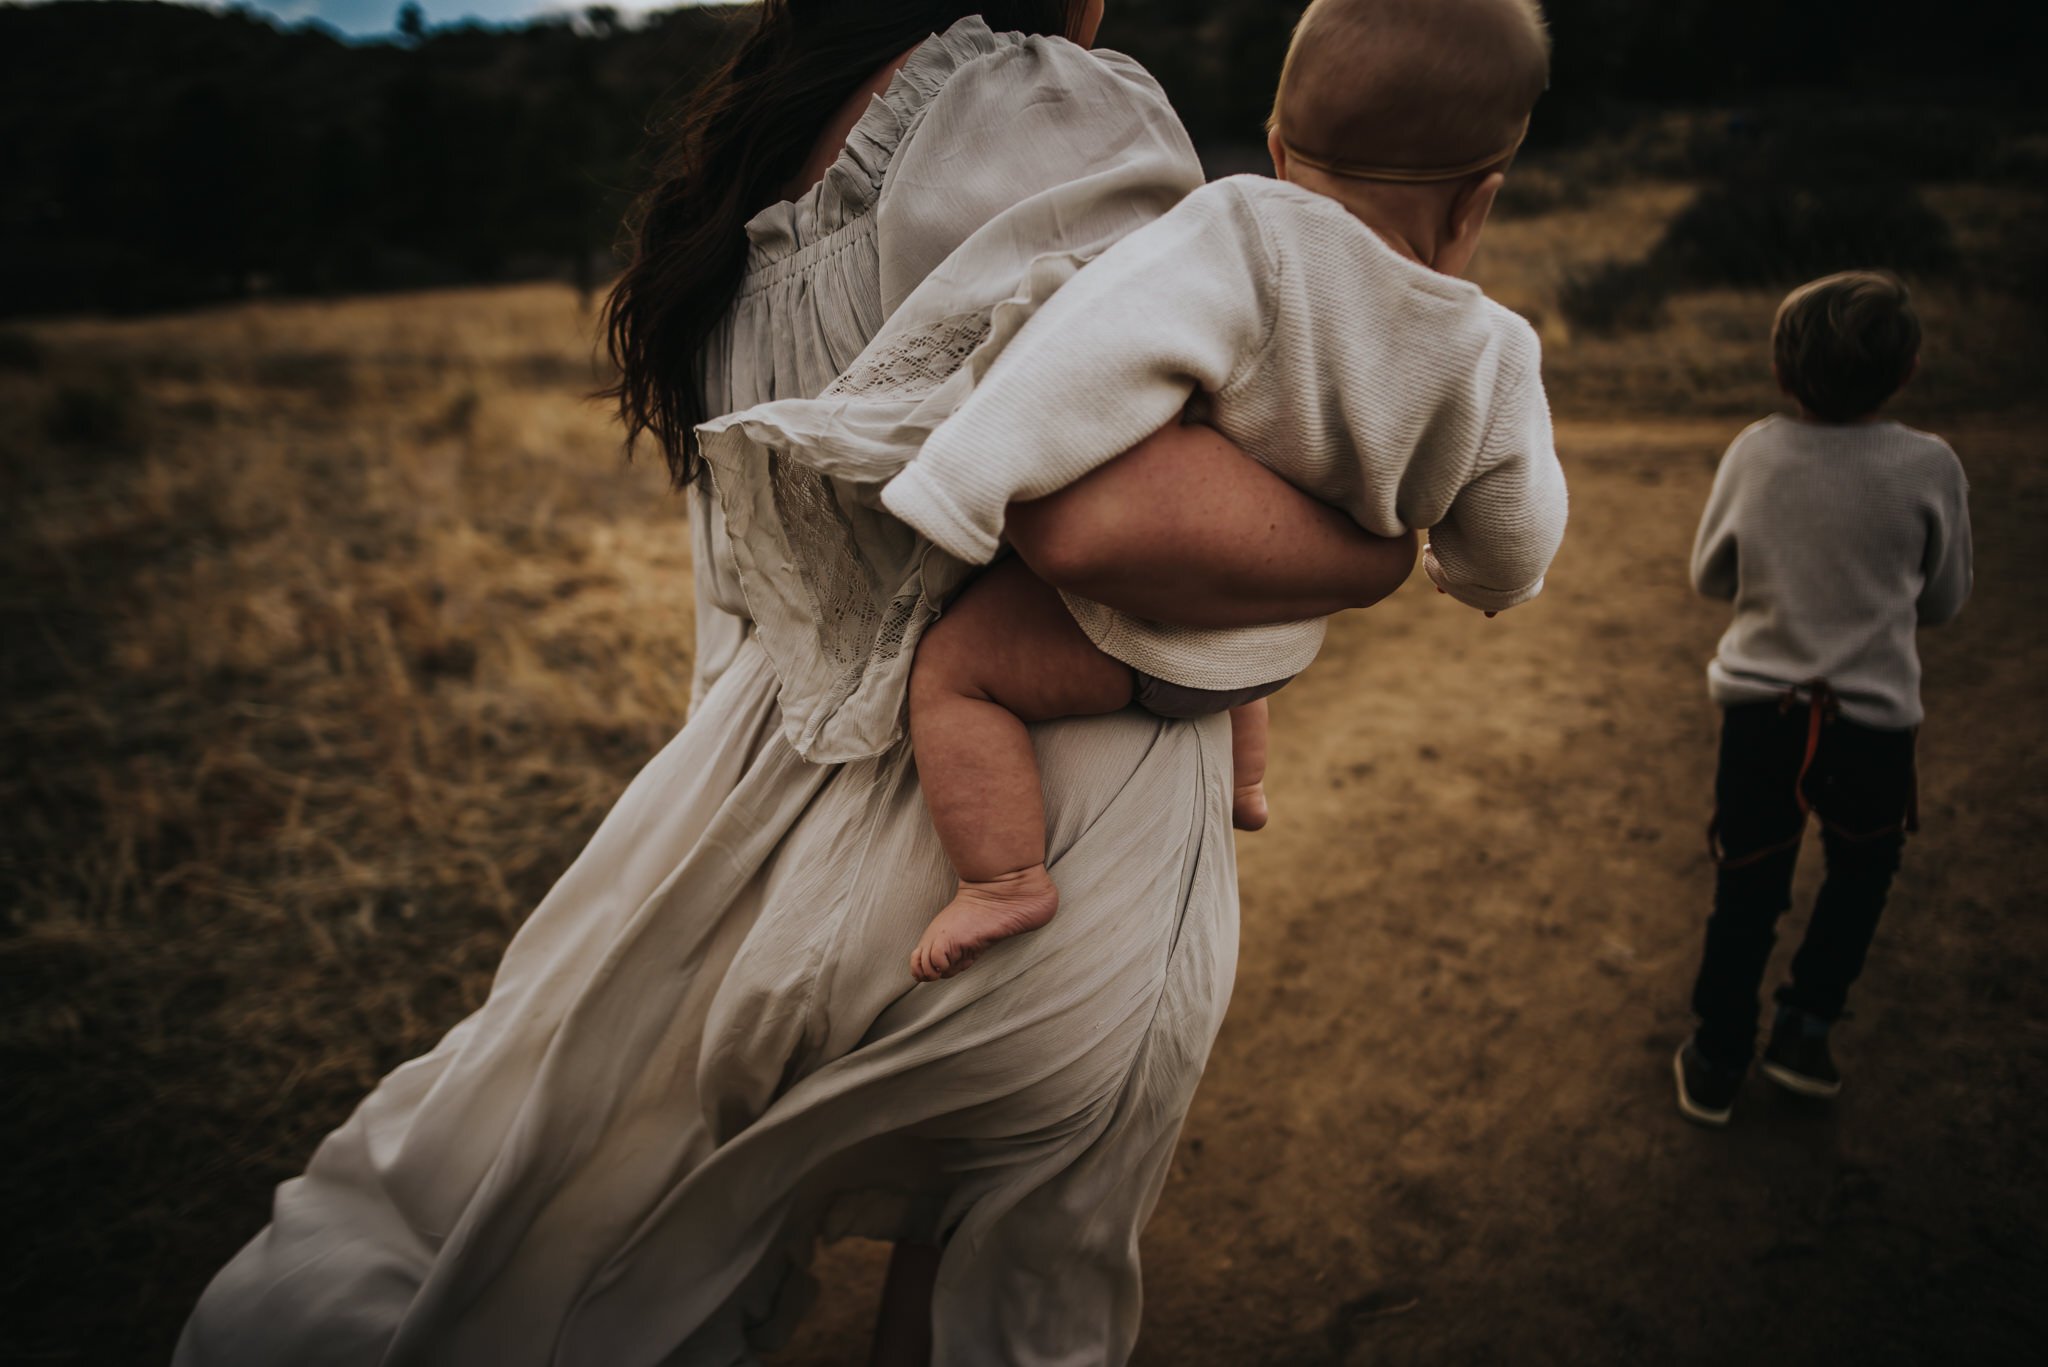 Miller+Family+Session+Mentorship+Colorado+Springs+Colorado+Sunset+Ute+Valley+Park+Mountains+Fields+Mom+Dad+Son+Daughter+Baby+Wild+Prairie+Photography-15-2020.jpeg